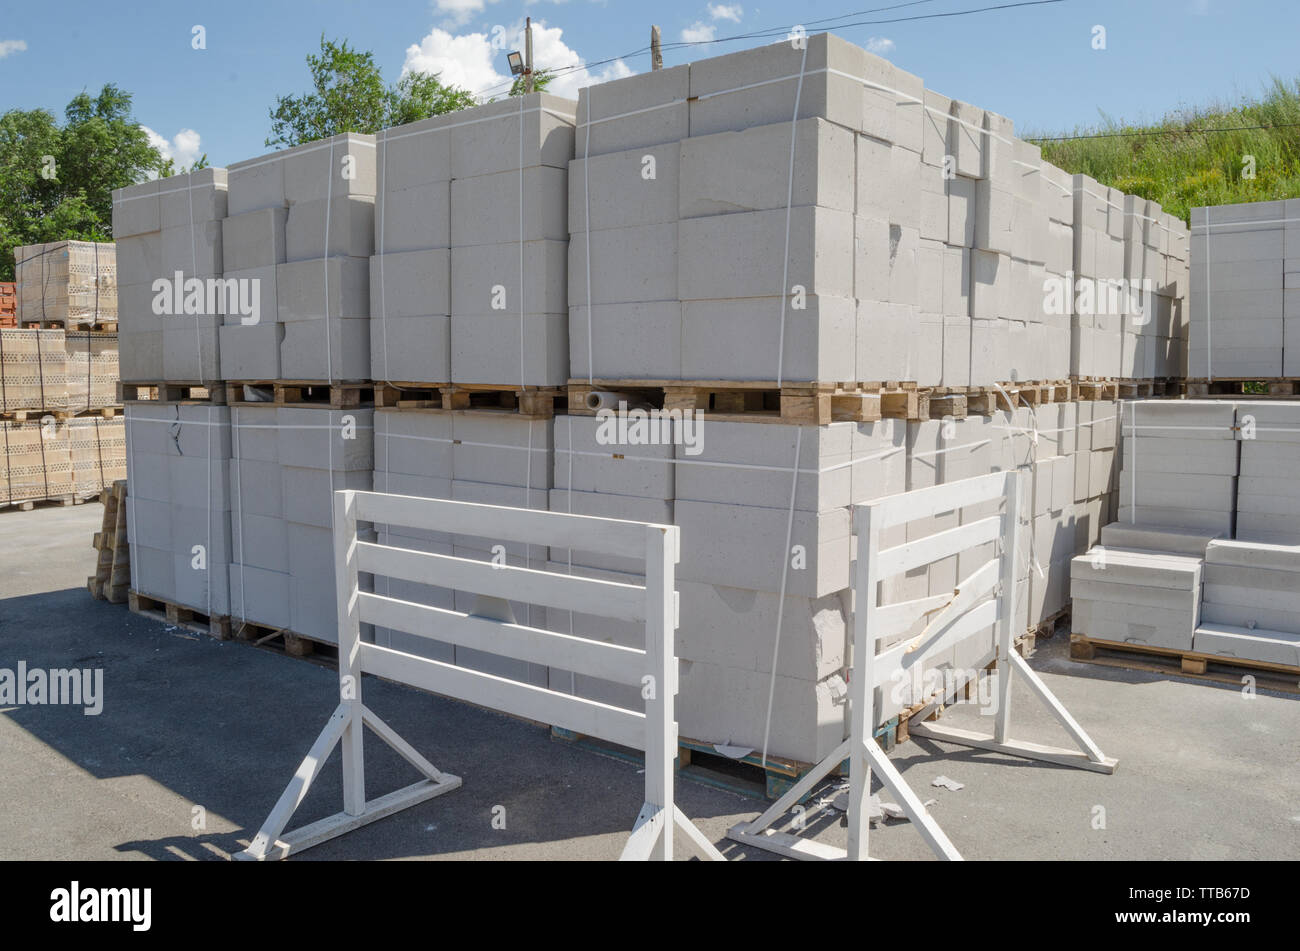 Sale Of Concrete Blocks Building Materials On Wooden Pallets Stock Photo Alamy